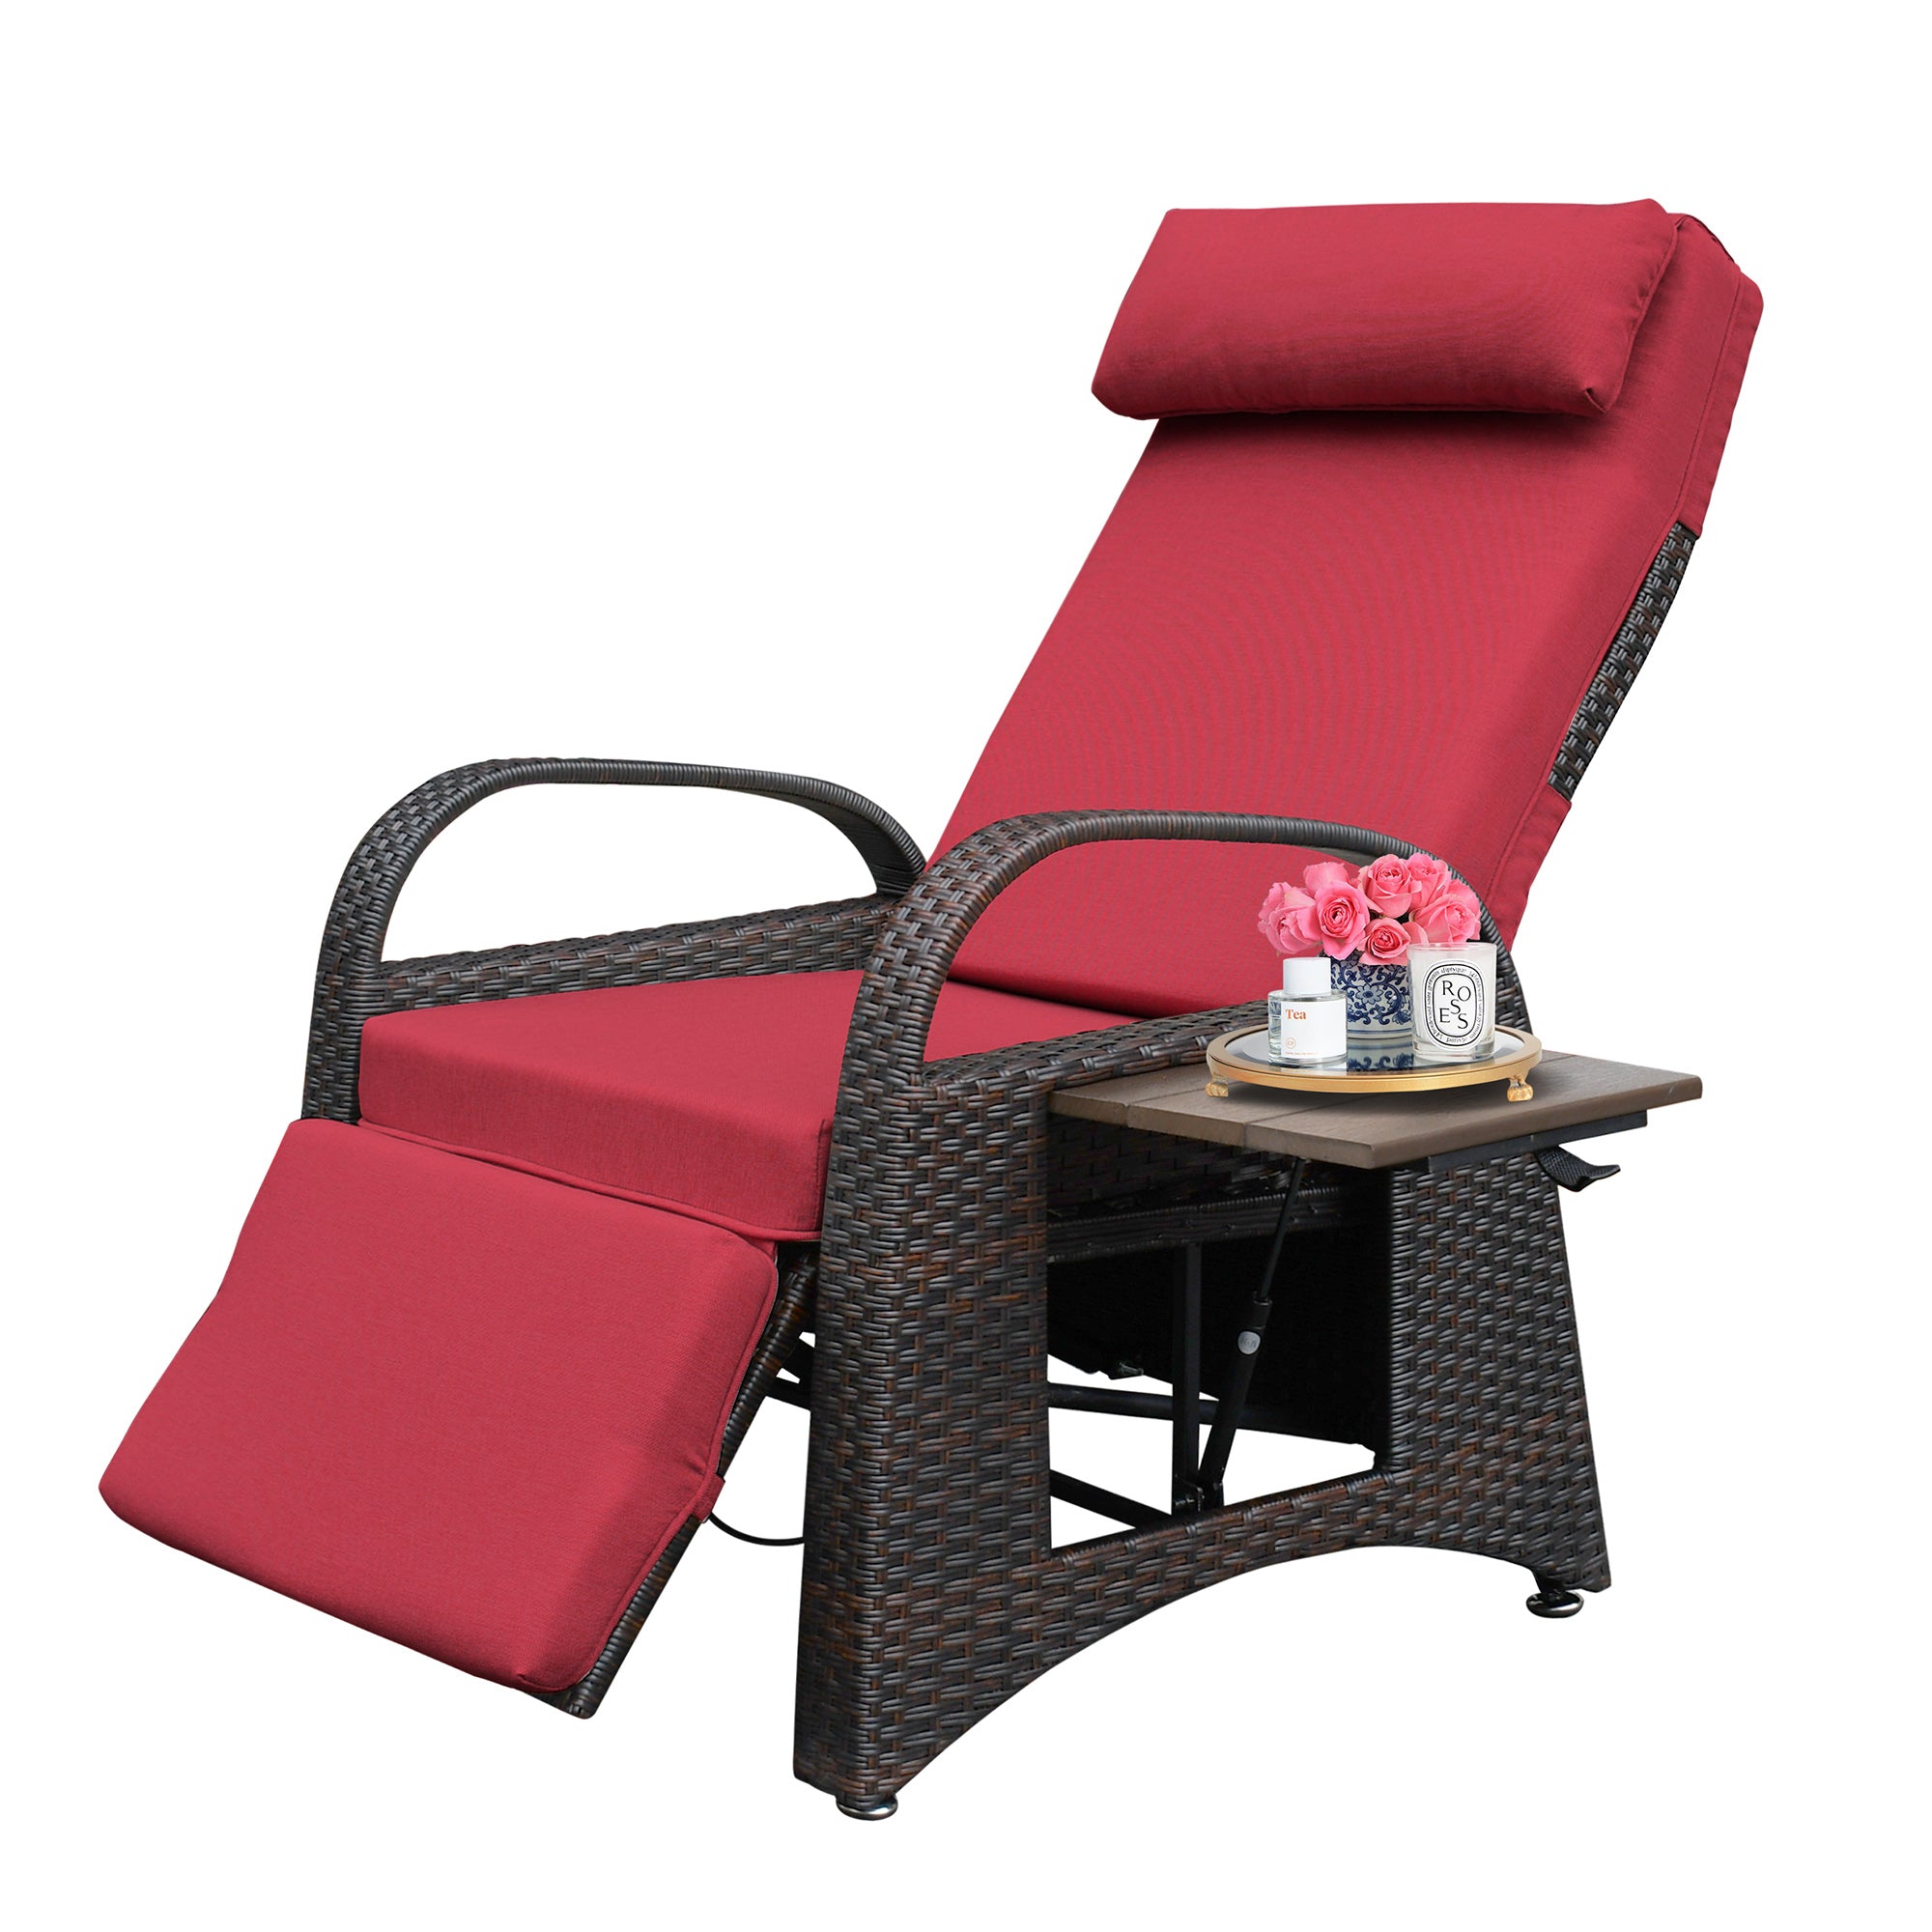 ZNTS Outdoor Recliner Chair,PE Wicker Adjustable Reclining Lounge Chair and Removable Soft Cushion, with W1889107785